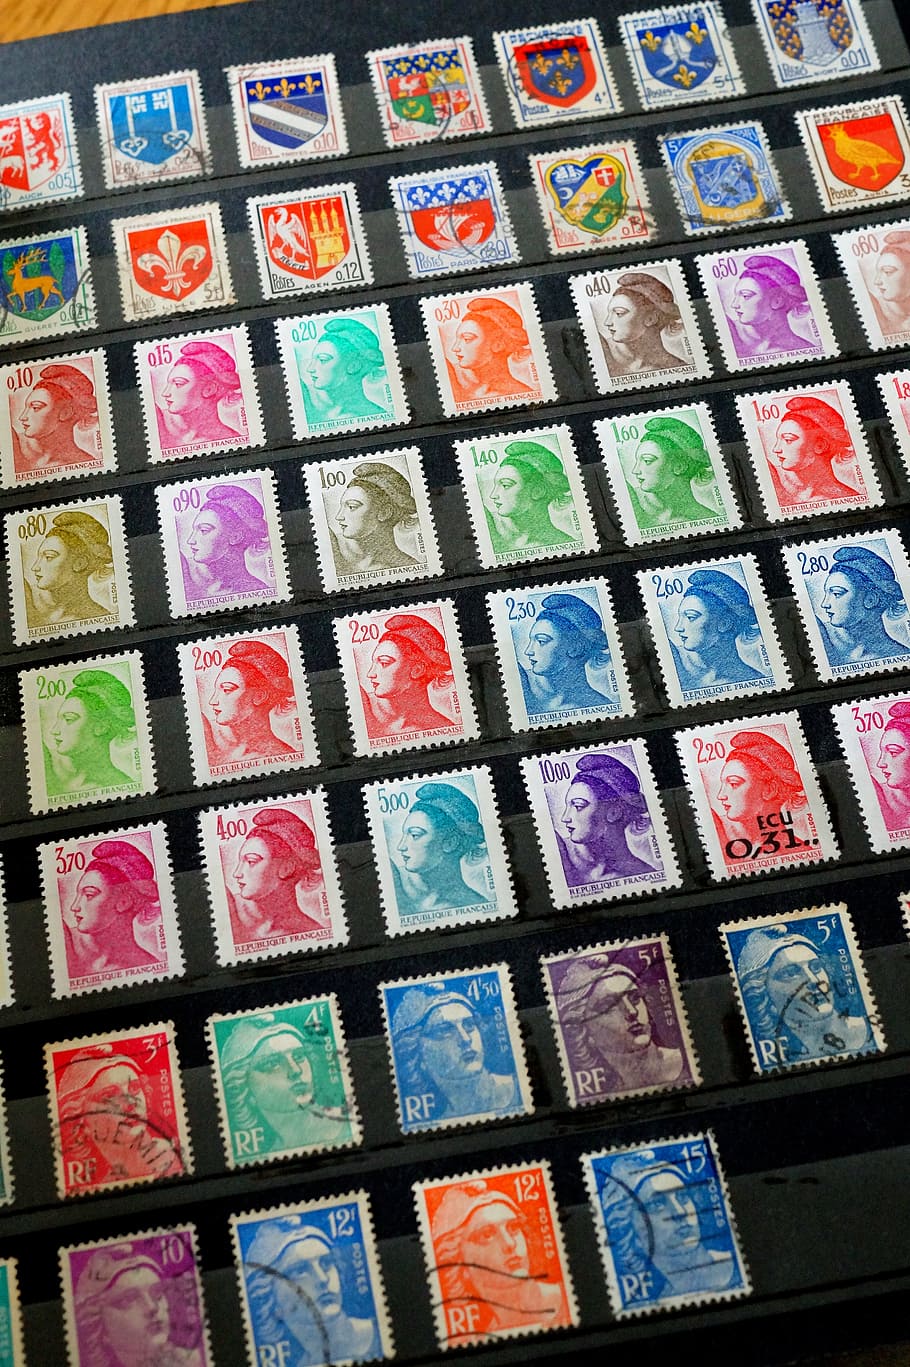 stamps, french stamps, collection, philately, mail, marianne, stamp collection, post, multi colored, full frame